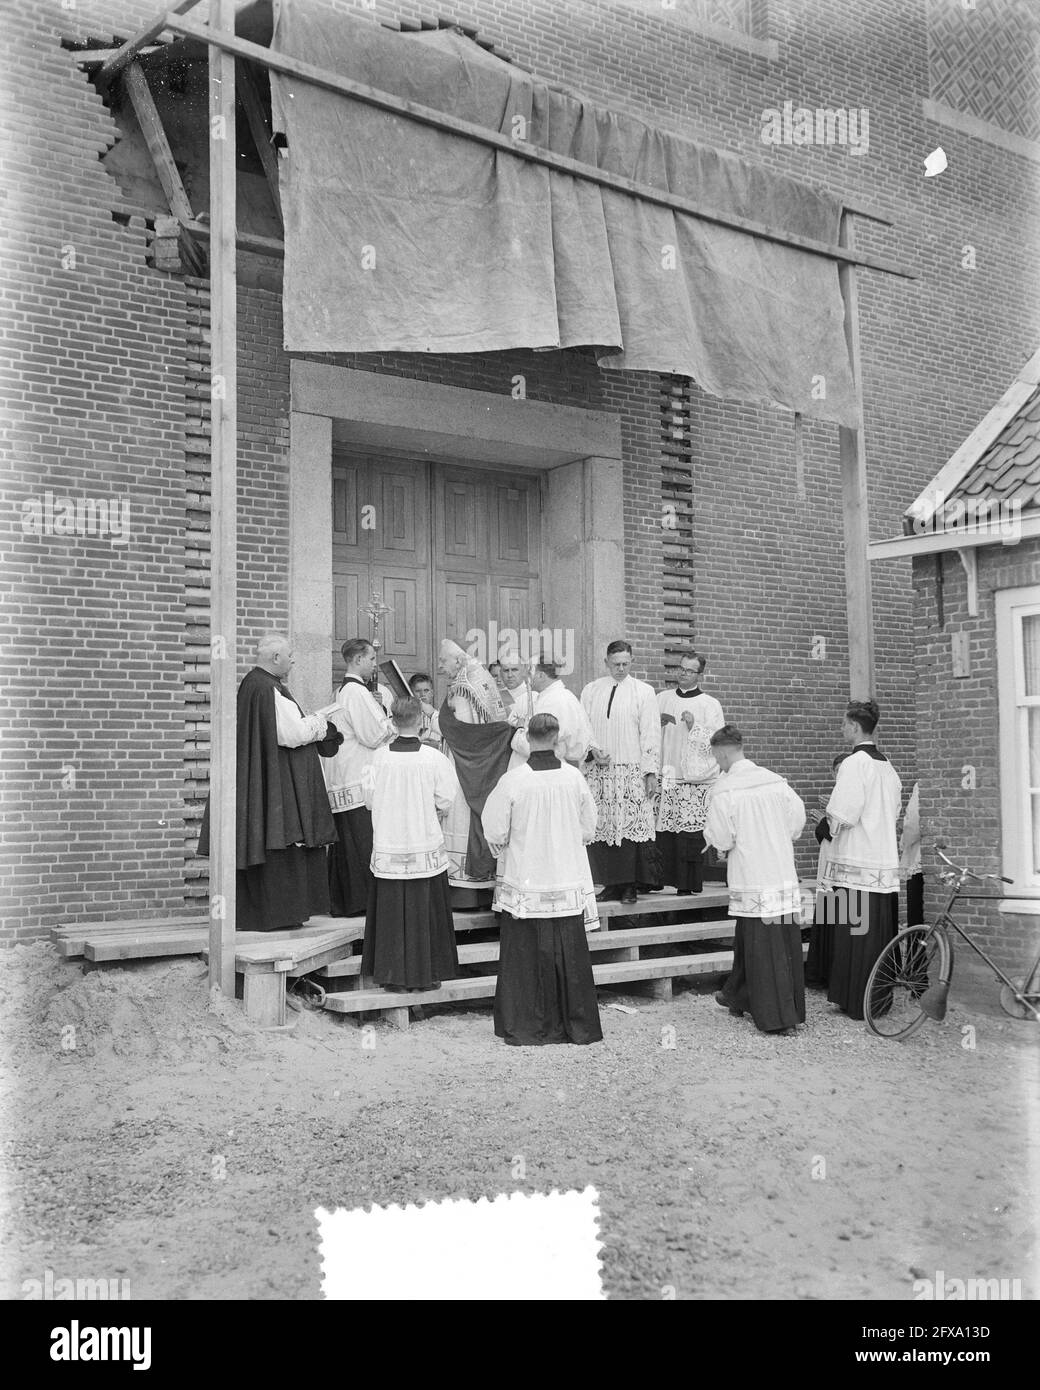 Dedication of the church Nieuw Vennep, Our Lady Immaculate Conception, June 7, 1956, The Netherlands, 20th century press agency photo, news to remember, documentary, historic photography 1945-1990, visual stories, human history of the Twentieth Century, capturing moments in time Stock Photo